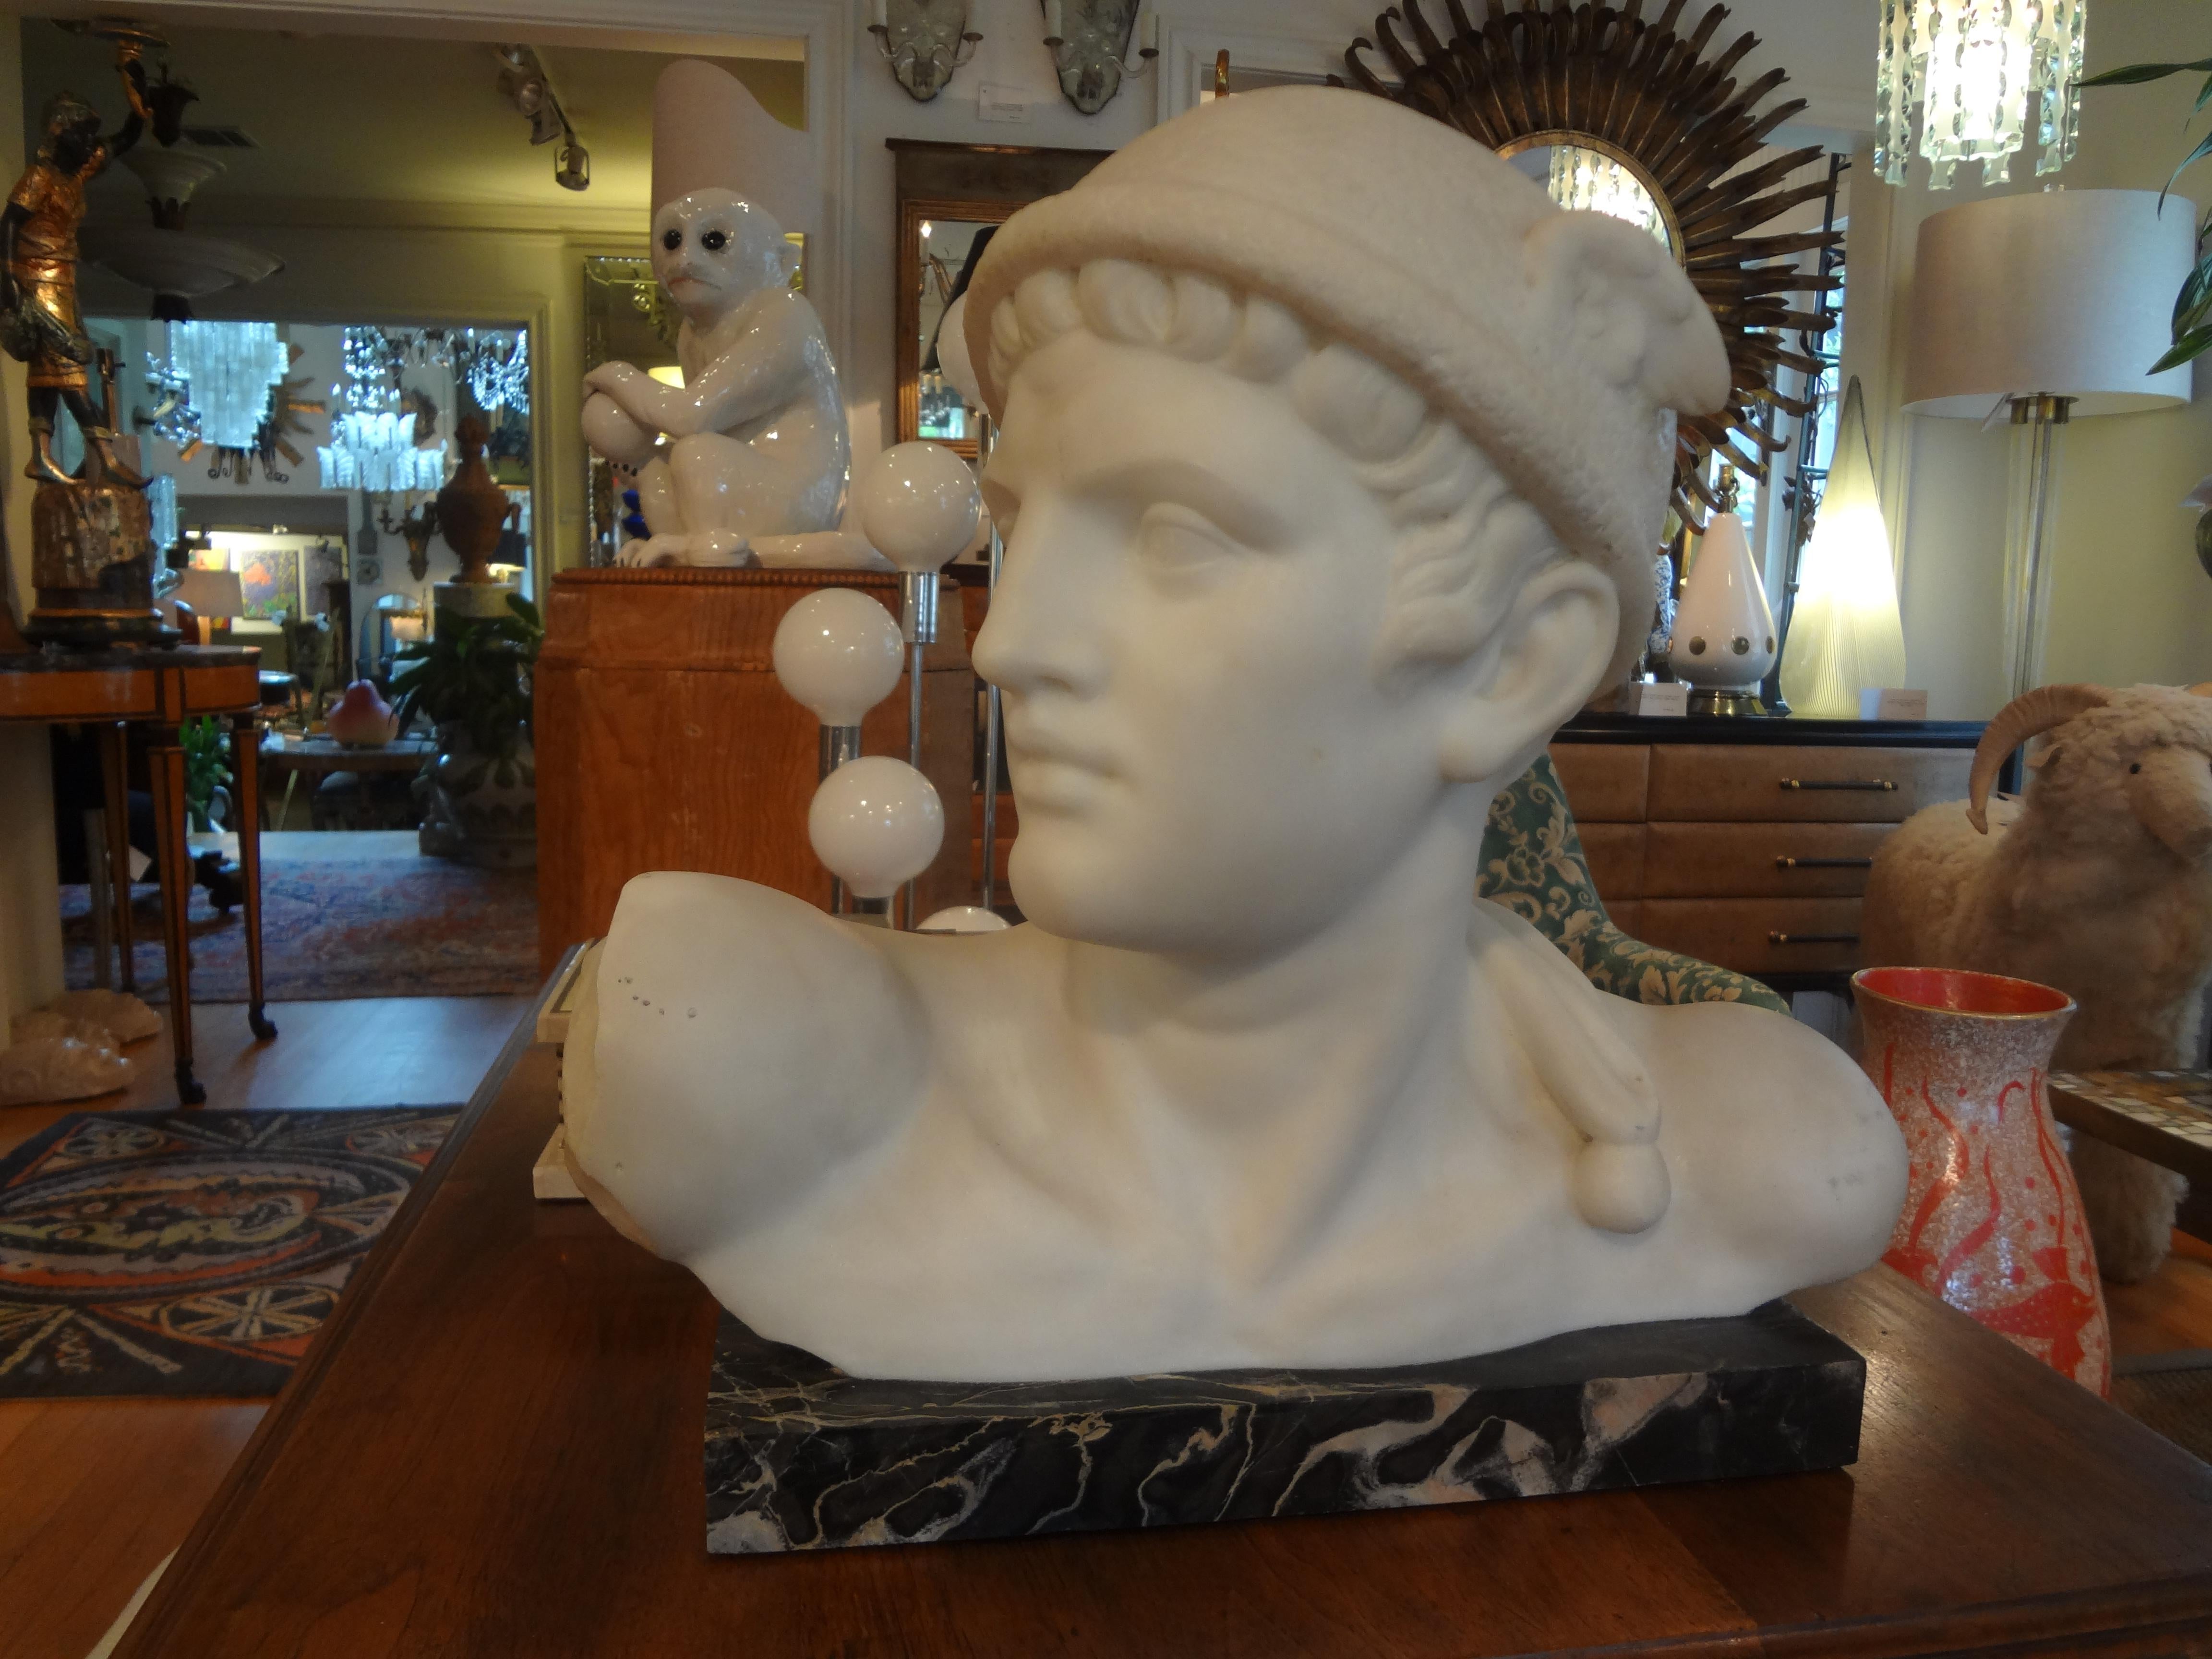 Outstanding Italian Carrara marble bust of Mercury or Hermes, signed Pugi, circa 1930. This carved marble sculpture from the studio of Guglielmo Pugi is a great example of the skill of the Pugi family. This Italian art deco bust is just one of many